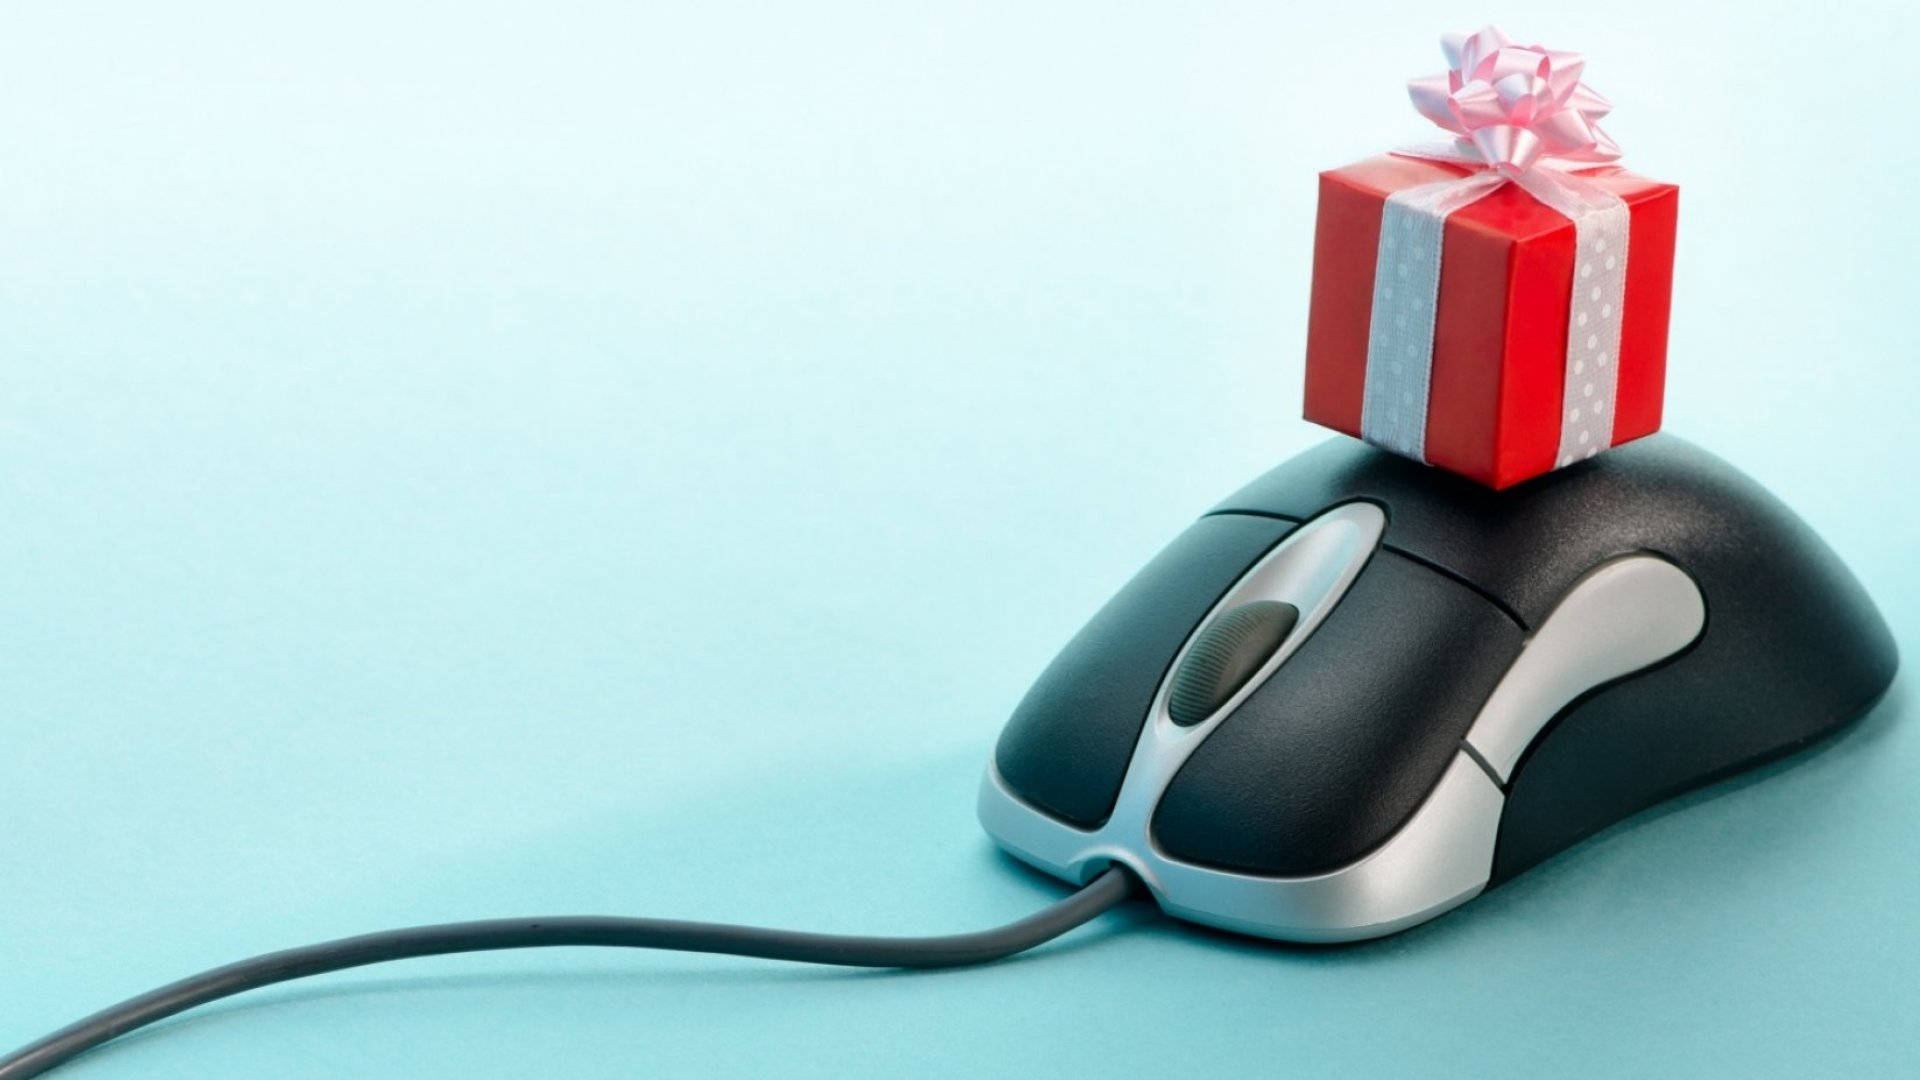 Pc Mouse Christmas Present Background